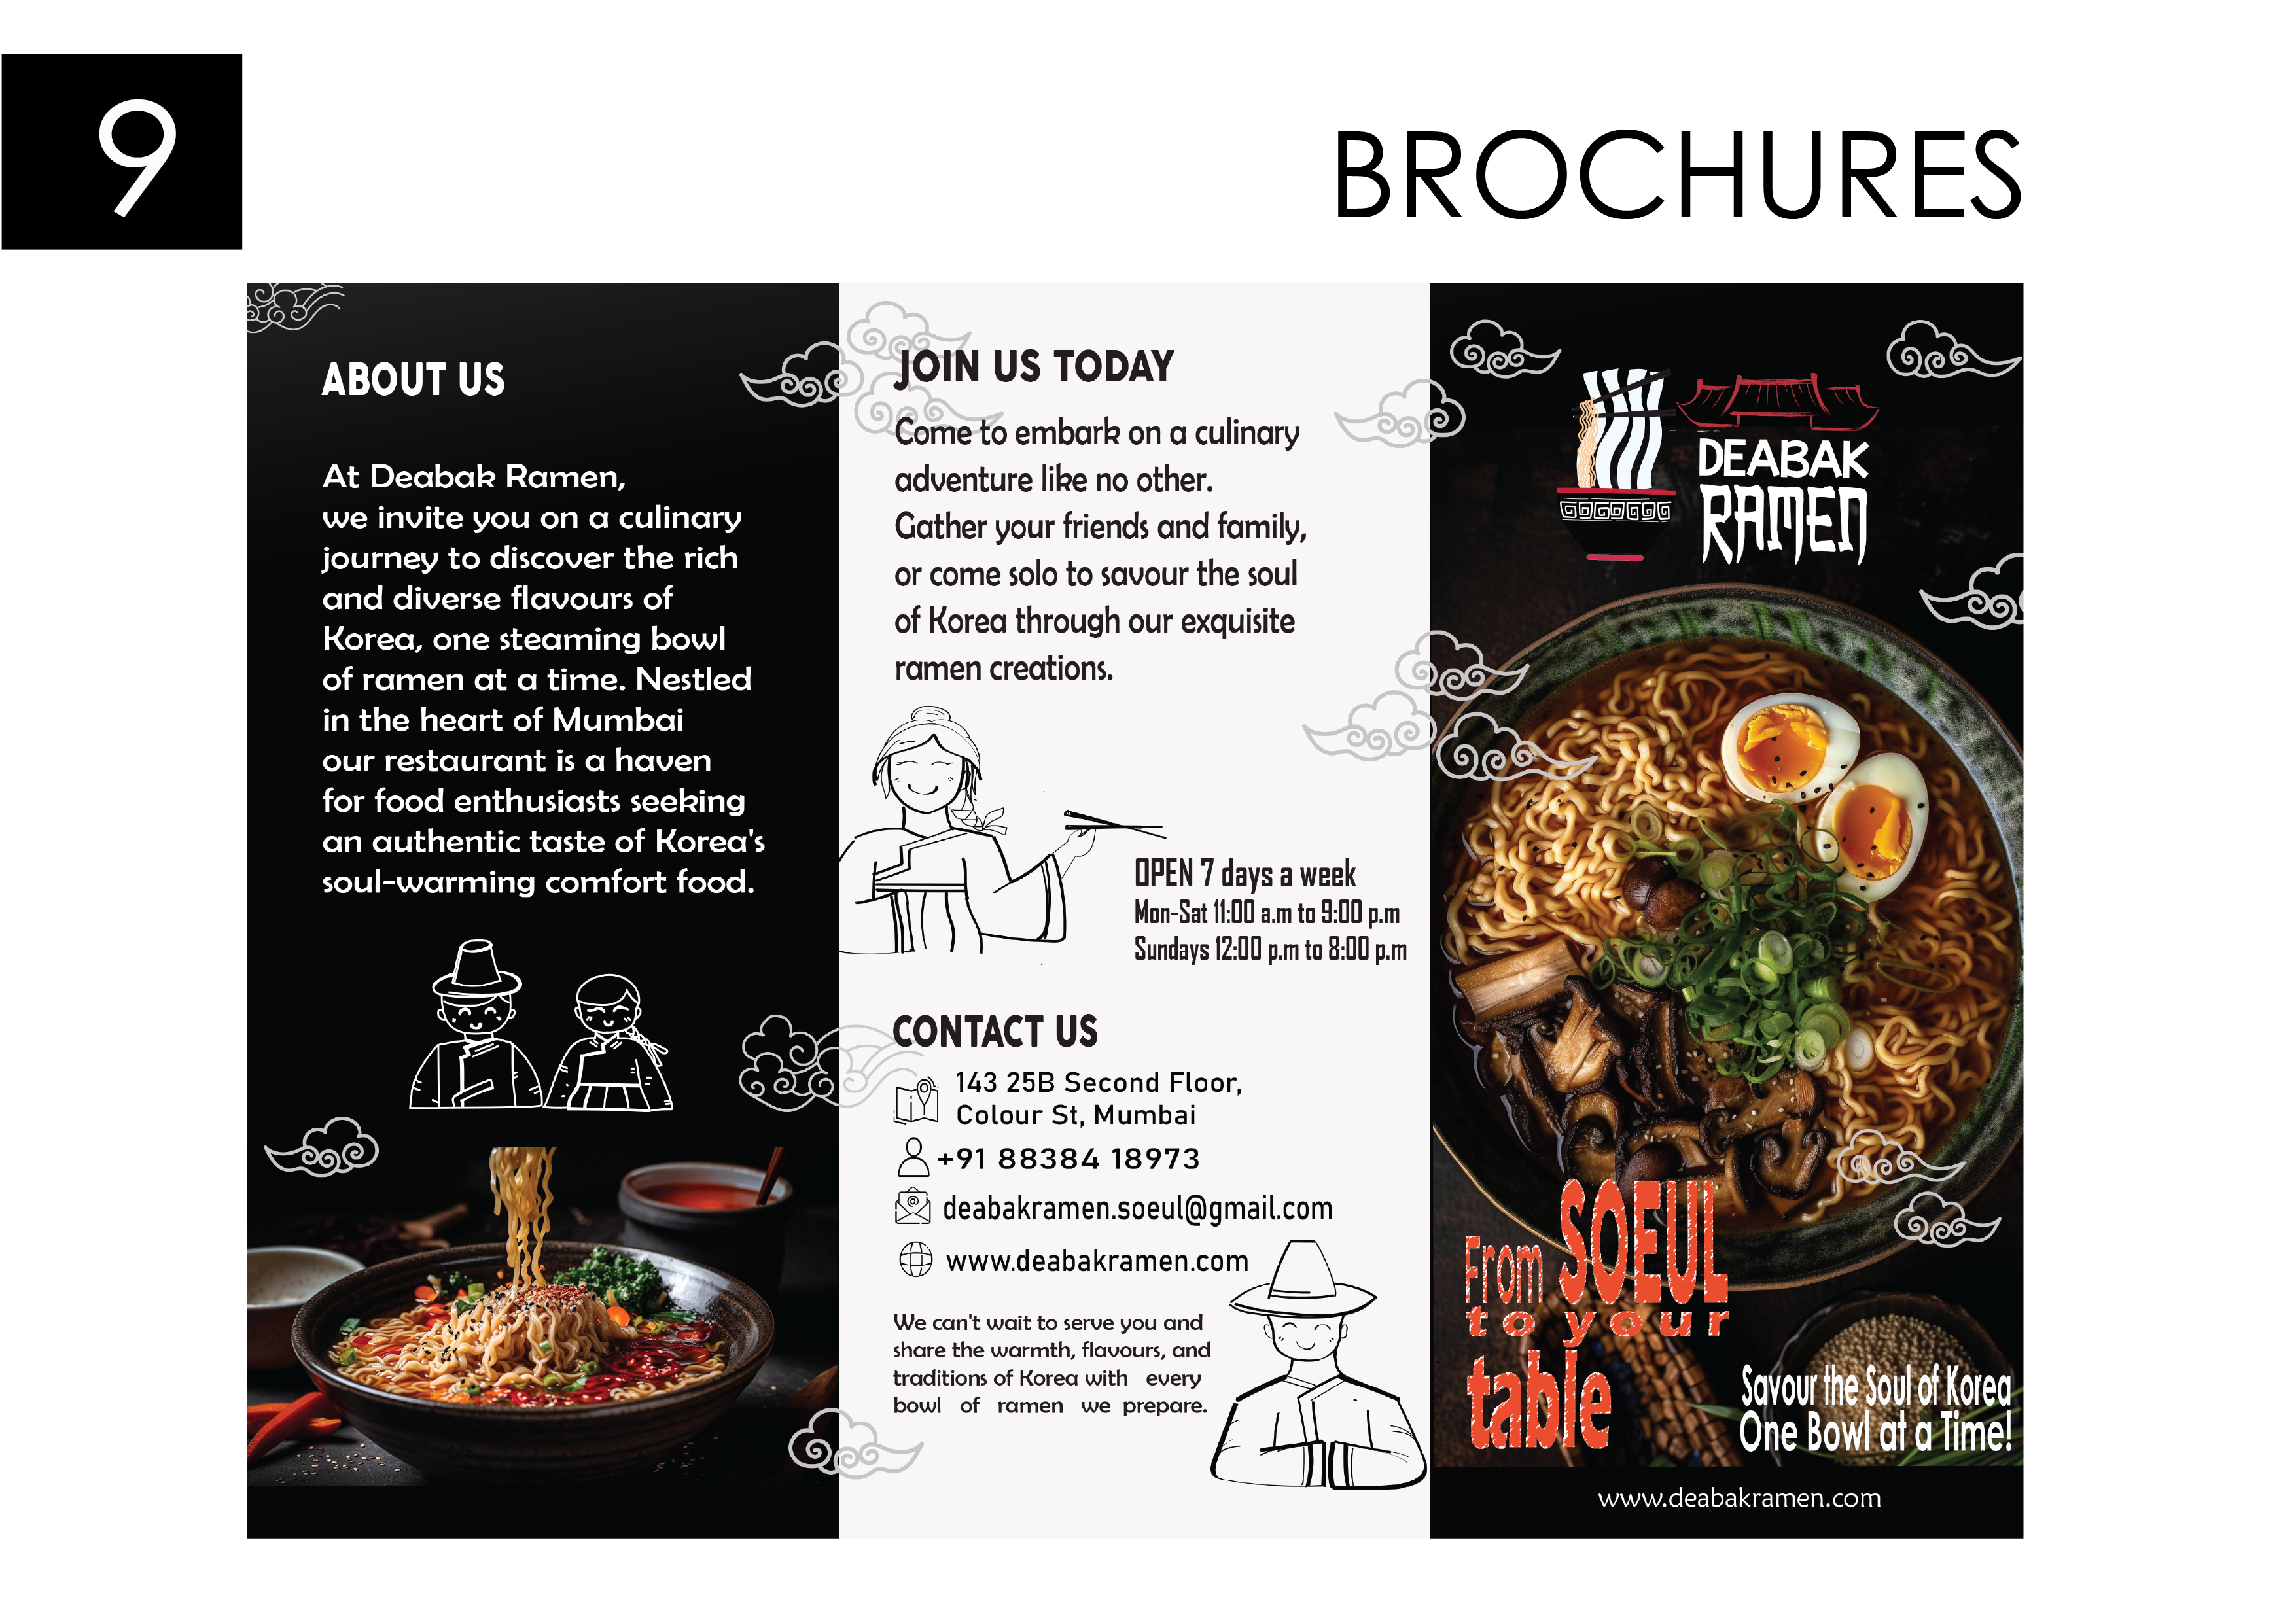 BROCHURES

ABOUT US JOIN US TODAY

Come to embark on a culinary
At Deabak Ramen, adventure like no other.
we invite you on a culinary Gather your friends and family,

journey to discover the rich
and diverse flavours of
Korea, one steaming bowl )
of ramen at a time. Nestled ramen creations.
in the heart of Mumbai

our restaurant is a haven

for food enthusiasts seeking
an authentic taste of Korea's

soul-warming comfort food. OPEN 7 days a week
Mon-Sat 11:00 a.m to 3:00 p.m

Sundays 12:00 p.m to 8:00 p.m

or come solo to savour the soul
of Korea through our exquisite

CONTACT US

or 143 25B Second Floor,
&amp; Colour St, Mumbai

2 +91 88384 18973
&amp;) deabakramen.soeul@gmail.com

€h www.deabakramen.com /

We can't wait to serve you and ¢ ) i 3 vy a on

share the warmth, flavours, and A ! : ¥: TTX XY)

traditions of Korea with every ¢ XY 3 A

bowl of ramen we prepare. : | 1 Savour | Rho Le
[ aN HINES ESTER

www.deabakramen.com